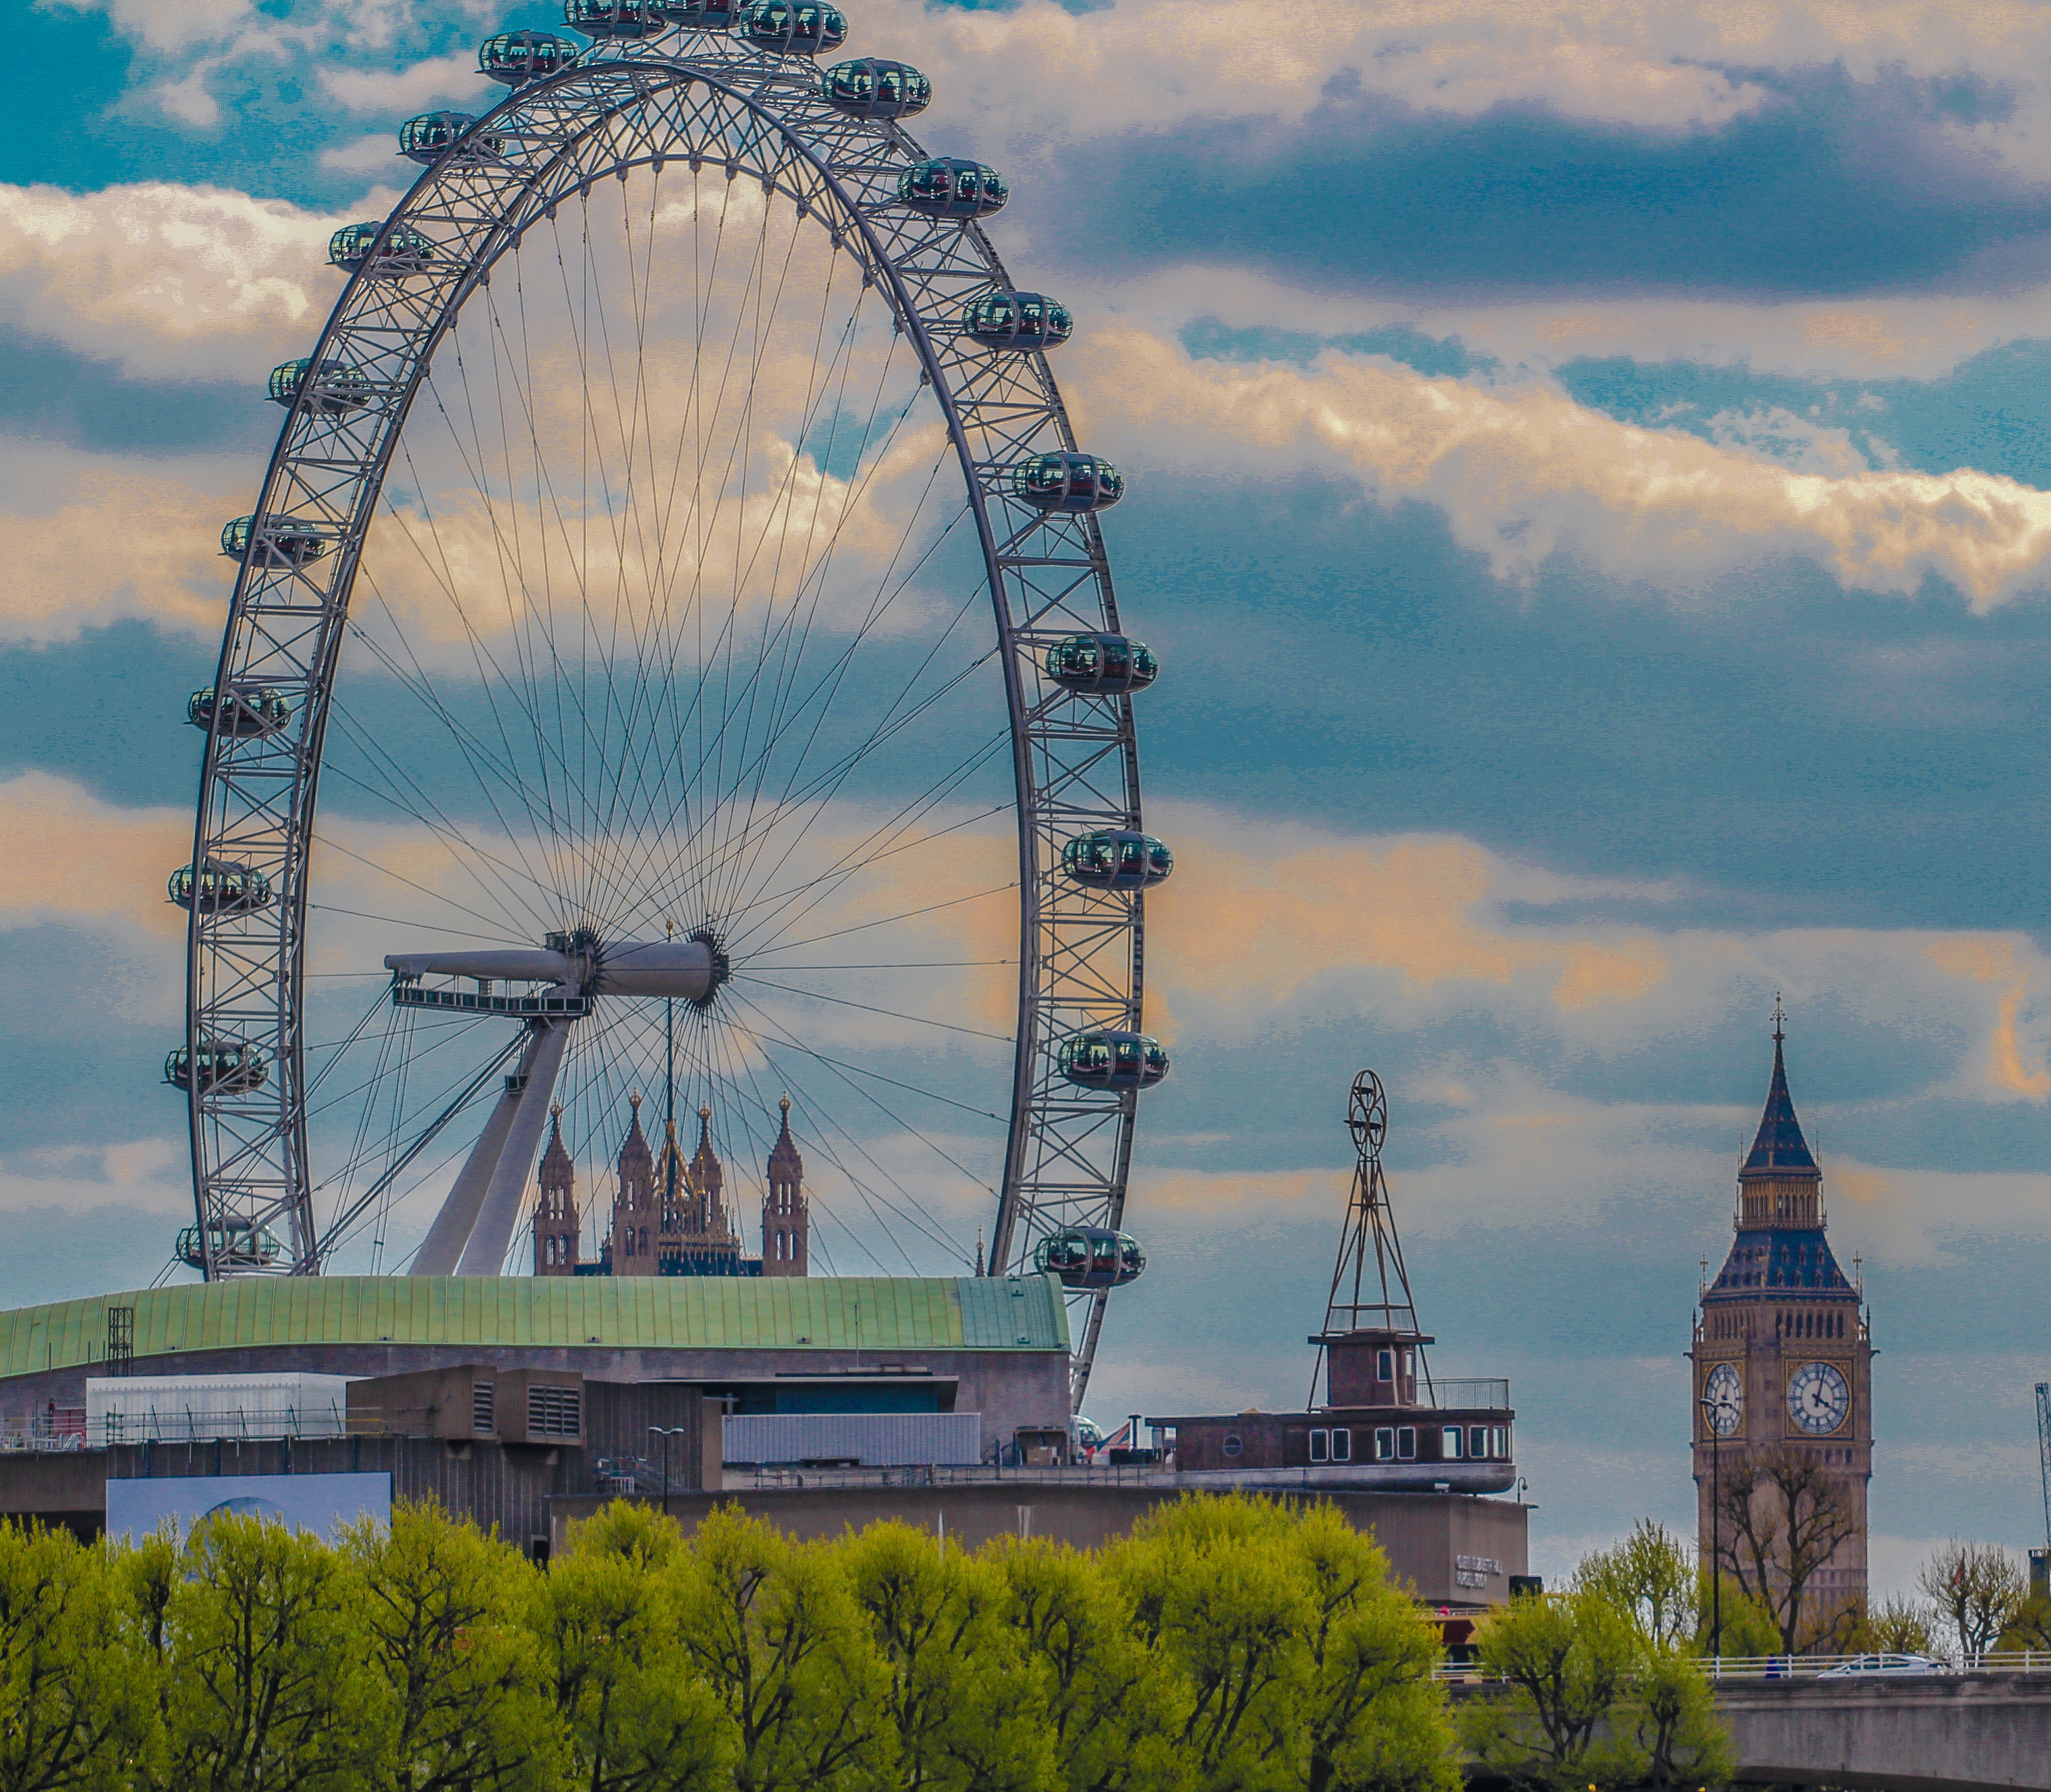 London Eye and Big Ben Tower Photo, Architecture, Outdoors, Trees, Travel, HQ Photo